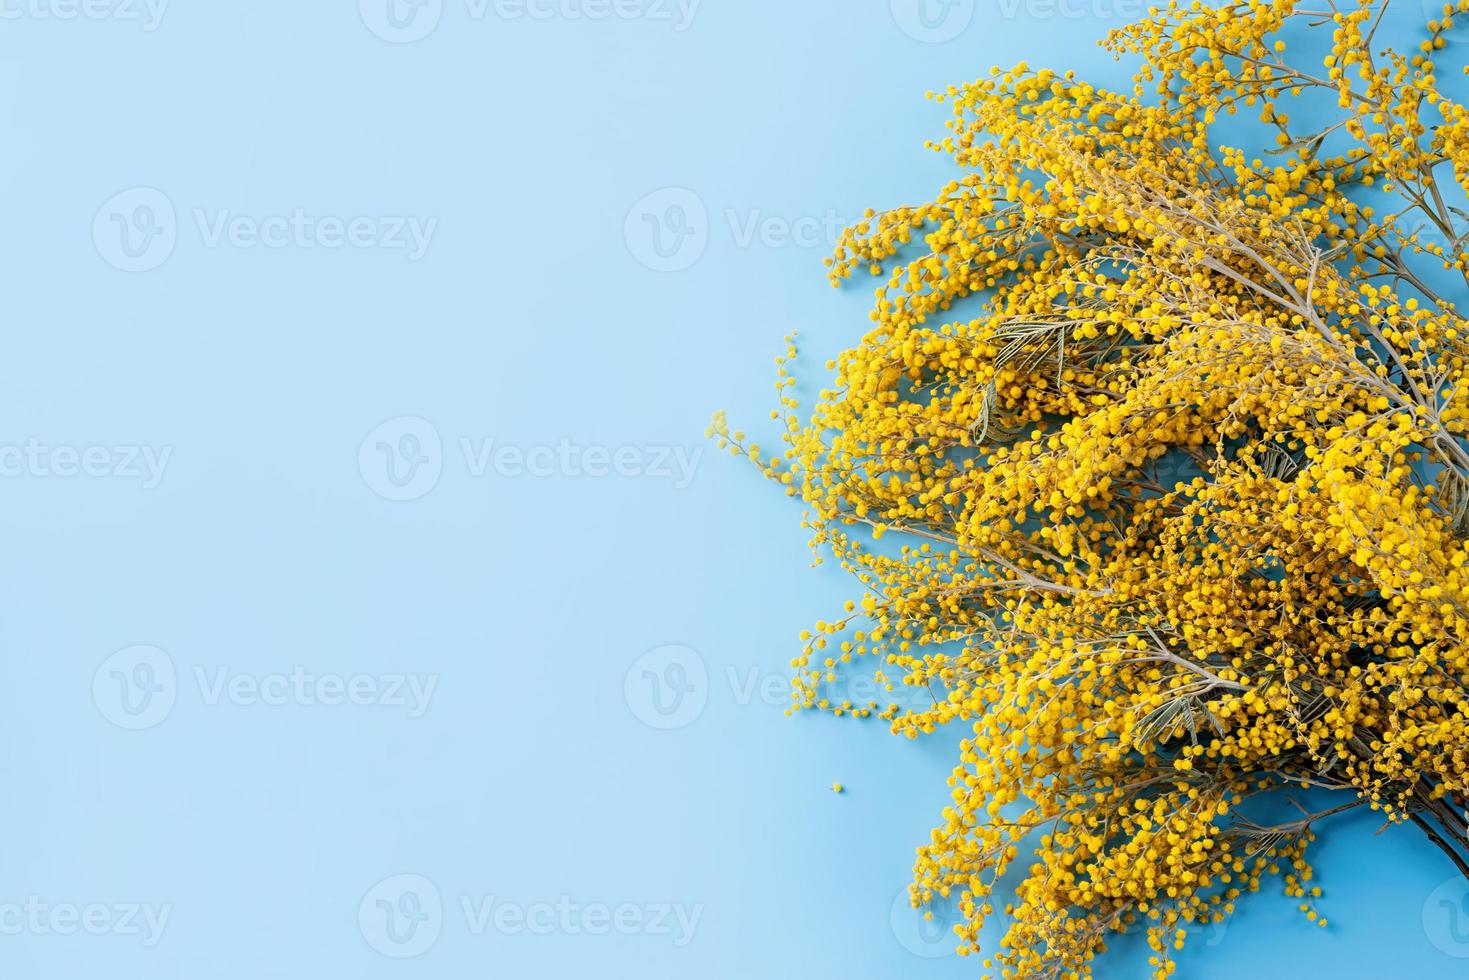 Frame of yellow mimosa flowers on blue solid bakground photo